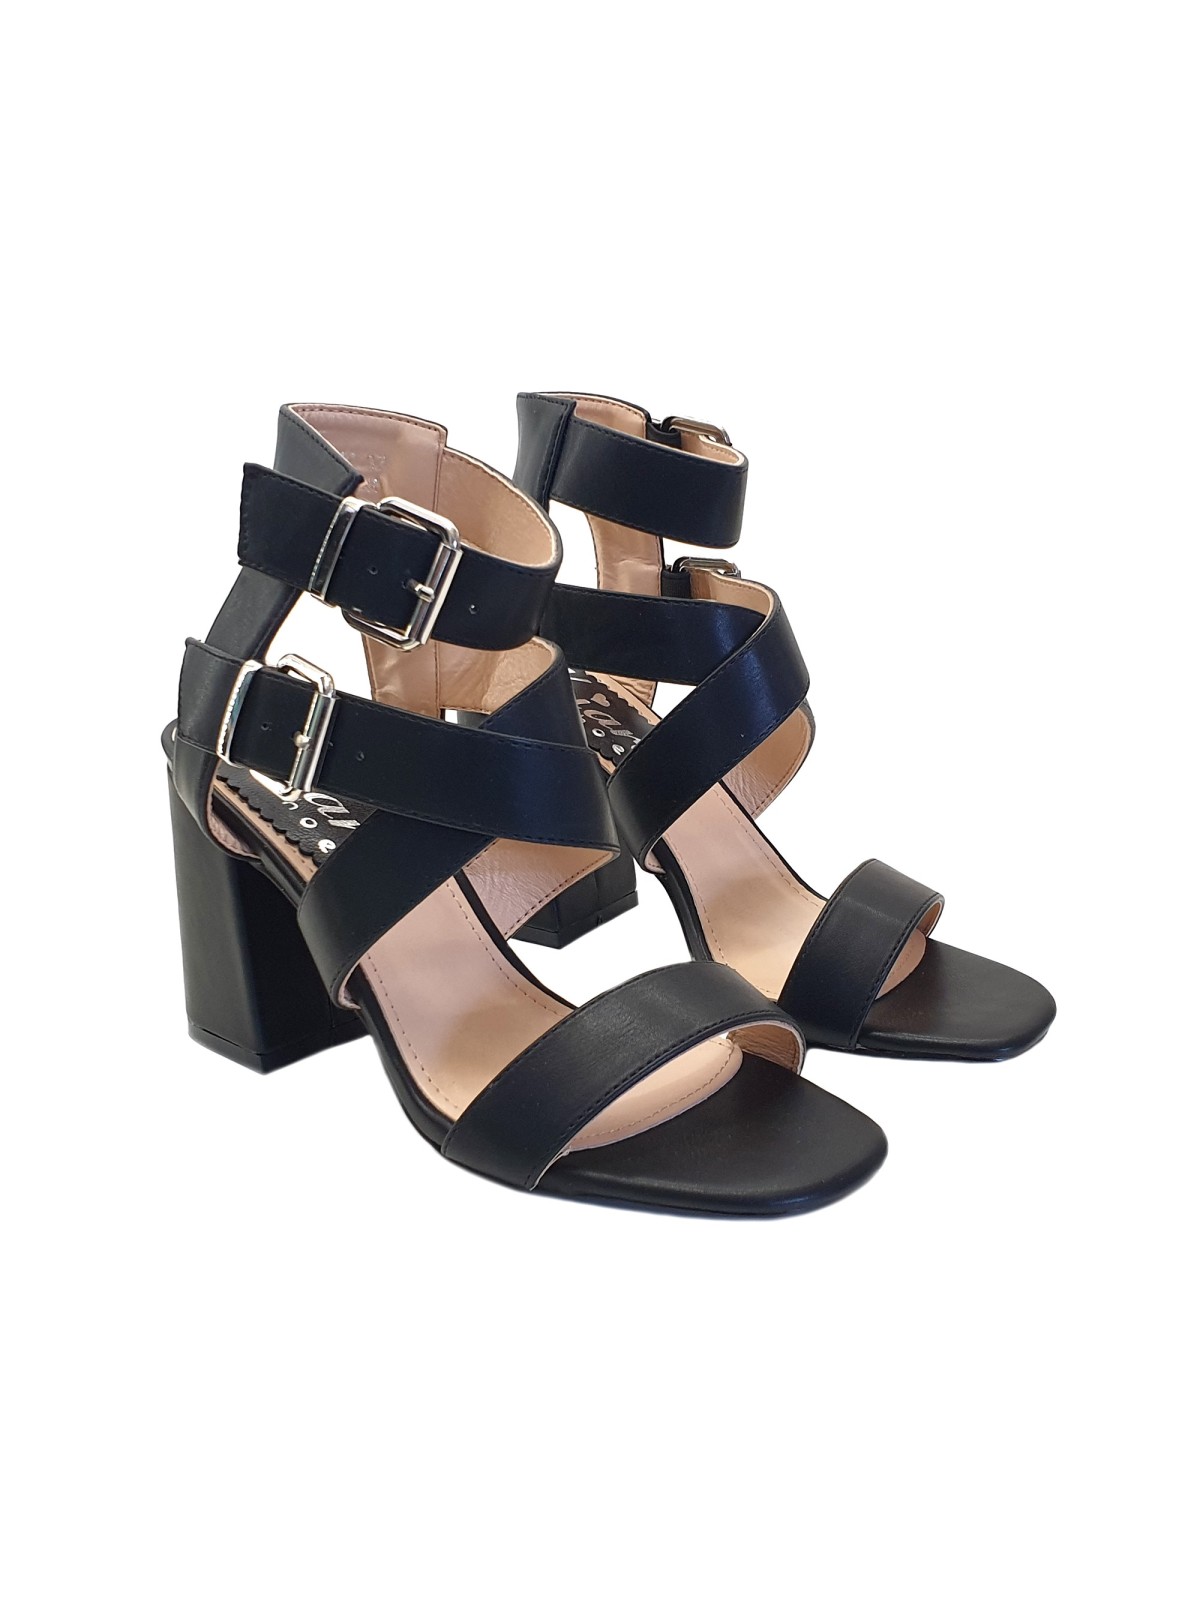 WOMEN'S BLACK SANDAL WITH DOUBLE ANKLE STRAP